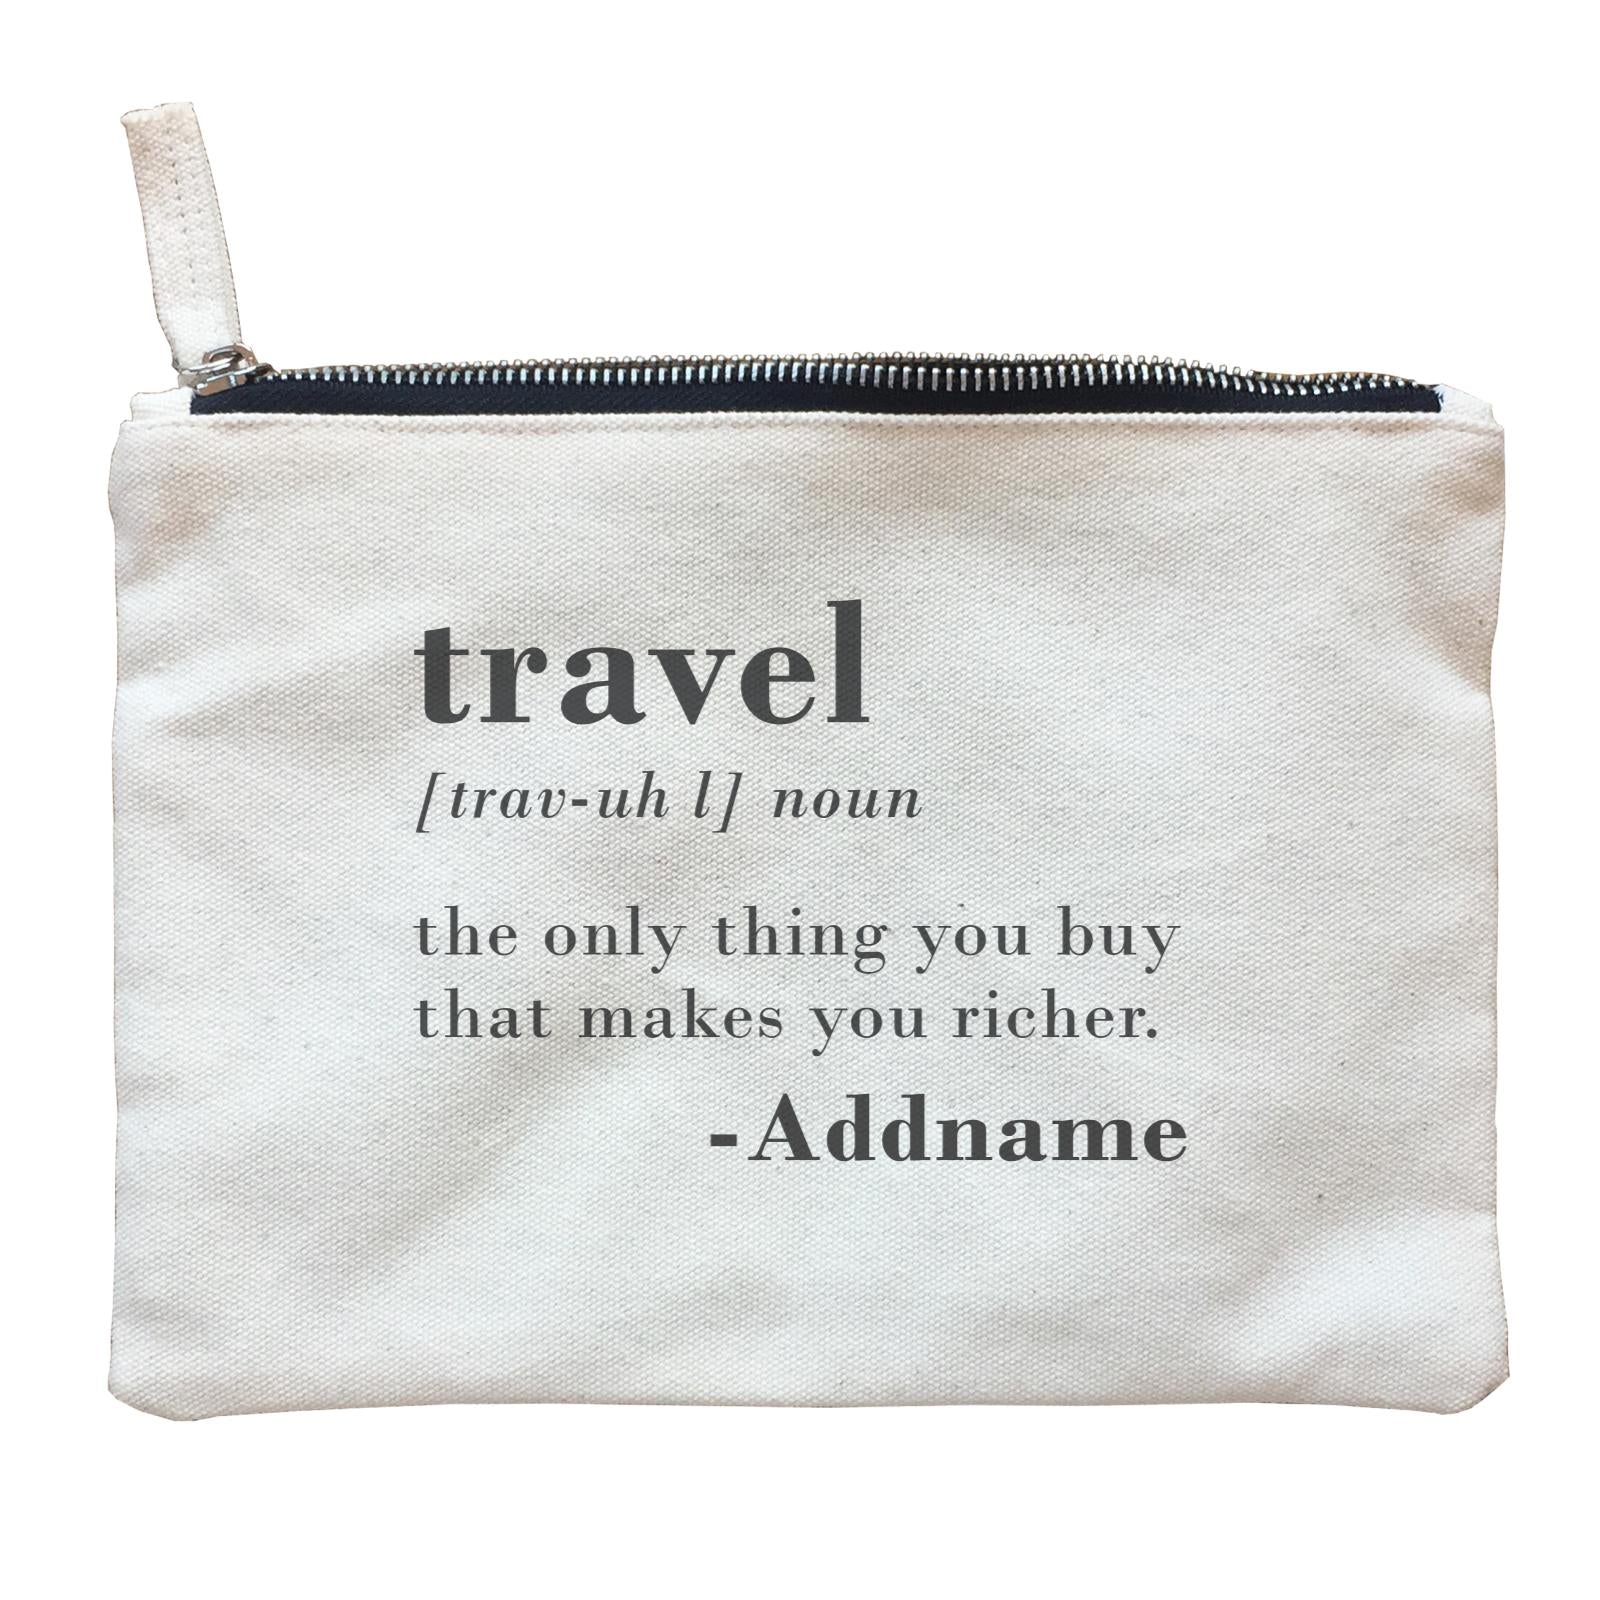 Travel Quotes Travel Noun Meaning Addname Zipper Pouch